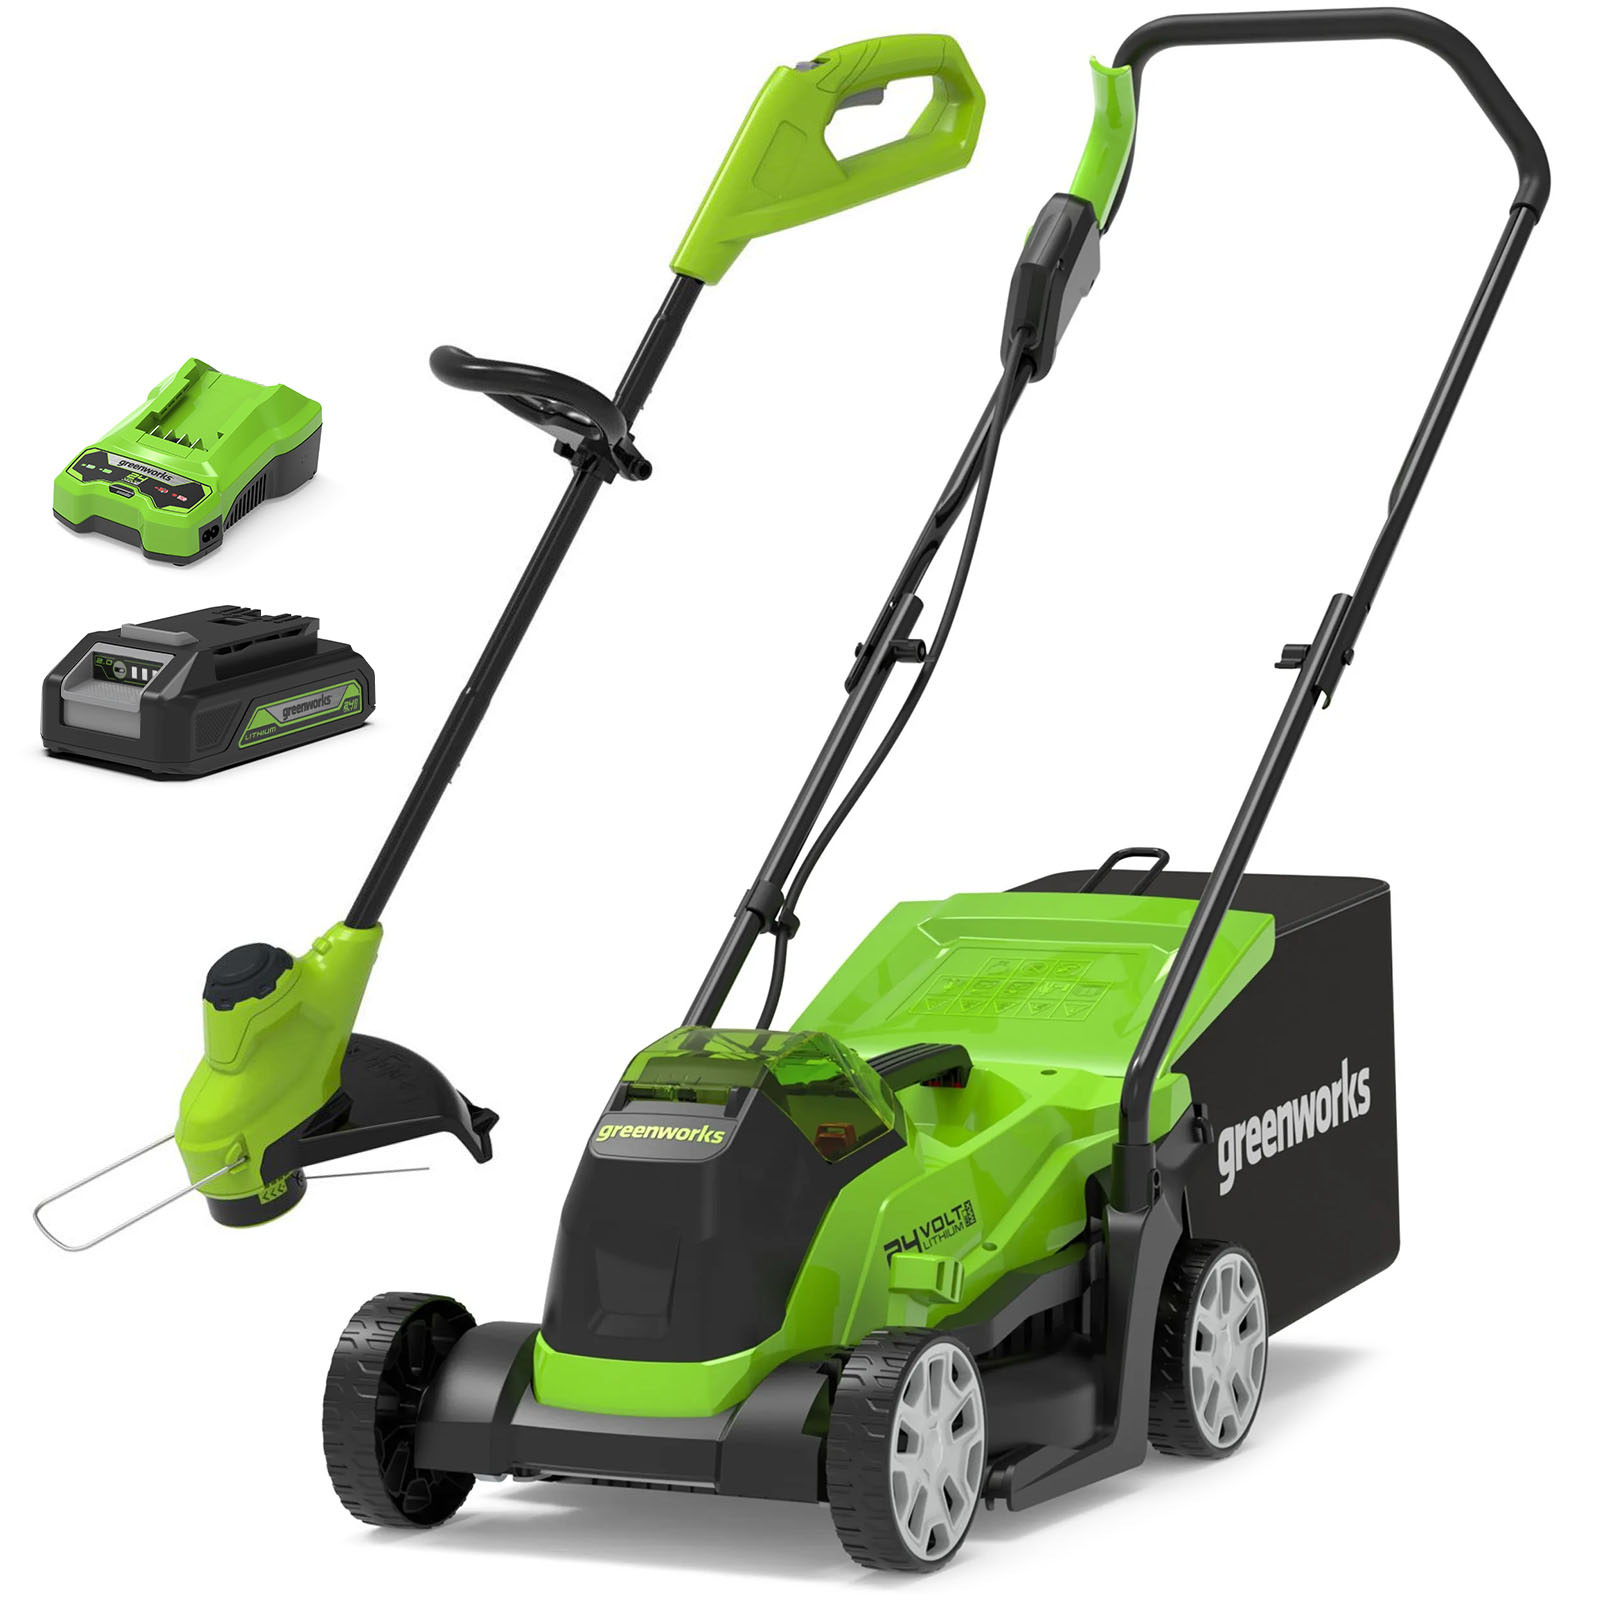 Greenworks 24v Cordless Brushless Rotary Lawnmower 330mm and Grass Trimmer 250mm 1 x 2ah Li-ion Charger